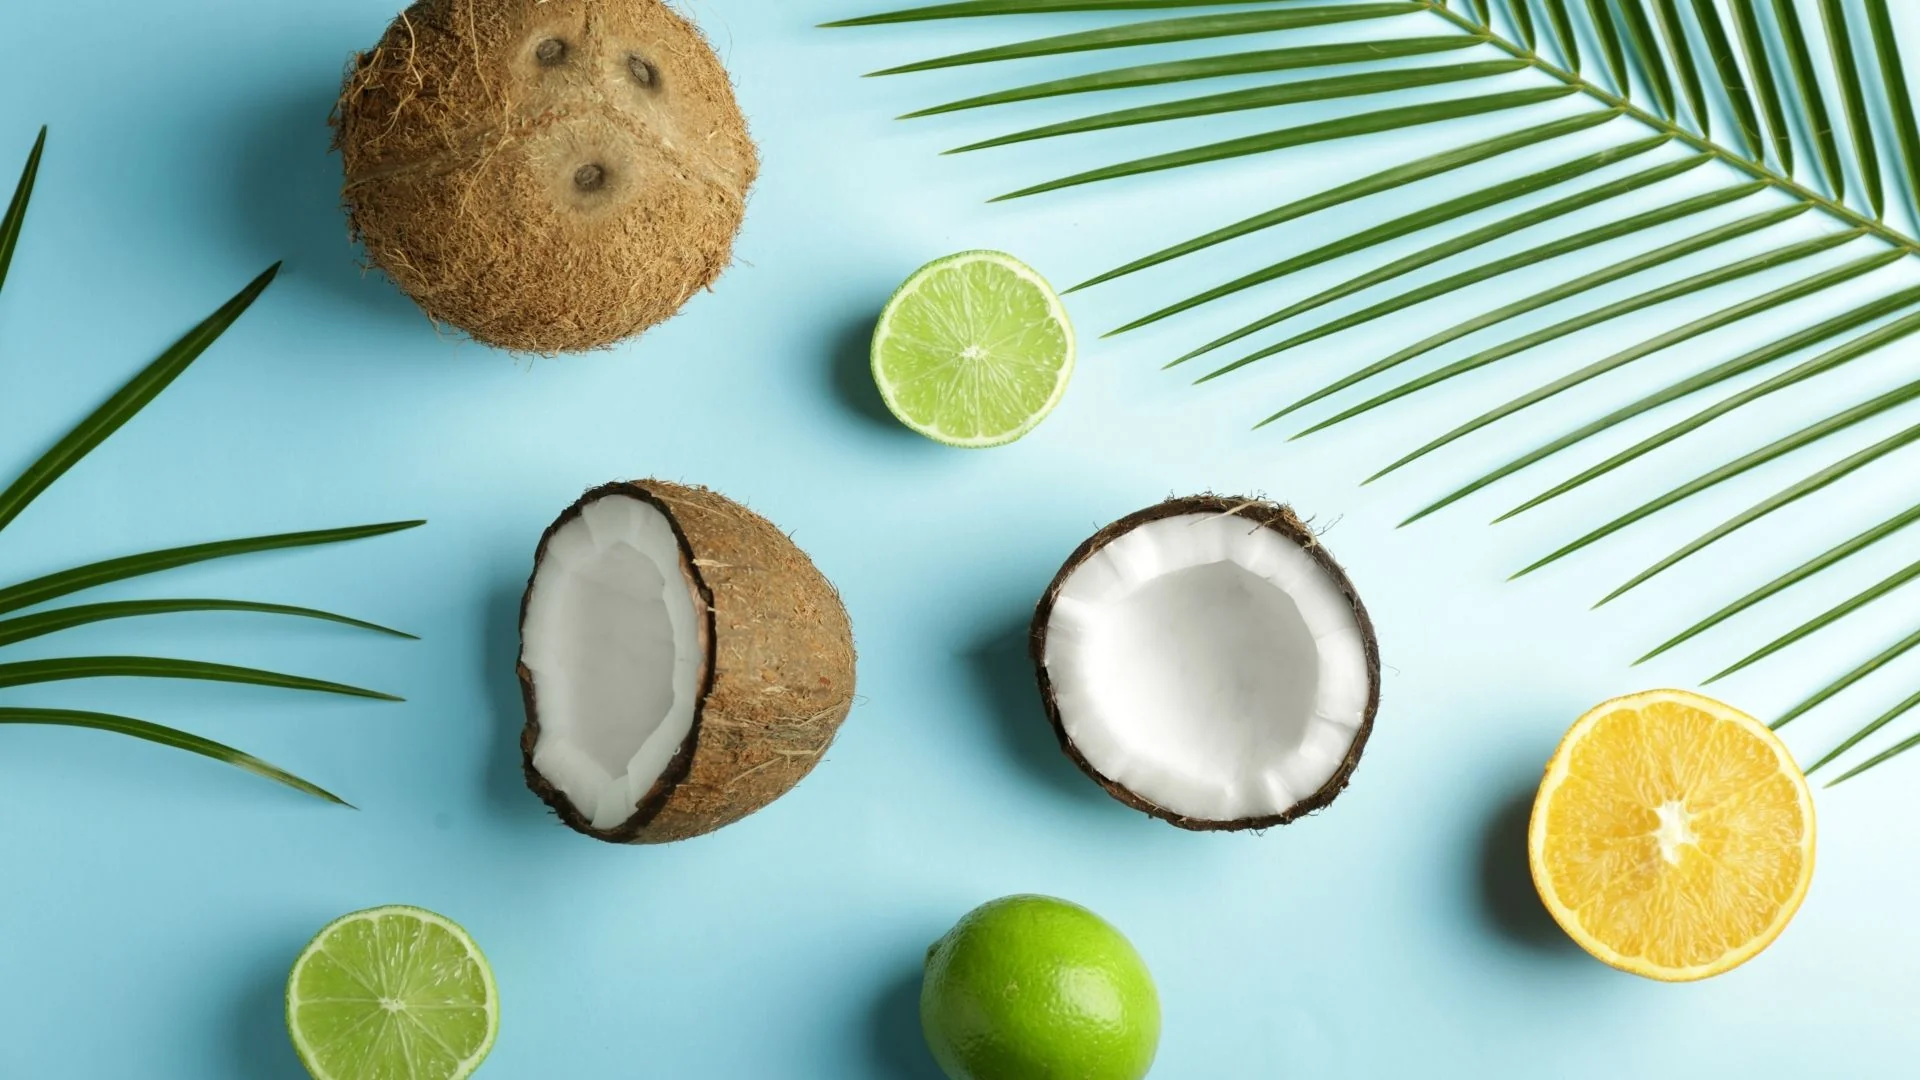 General 1920x1080 coconuts palm frond lime simple background food fruit leaves minimalism